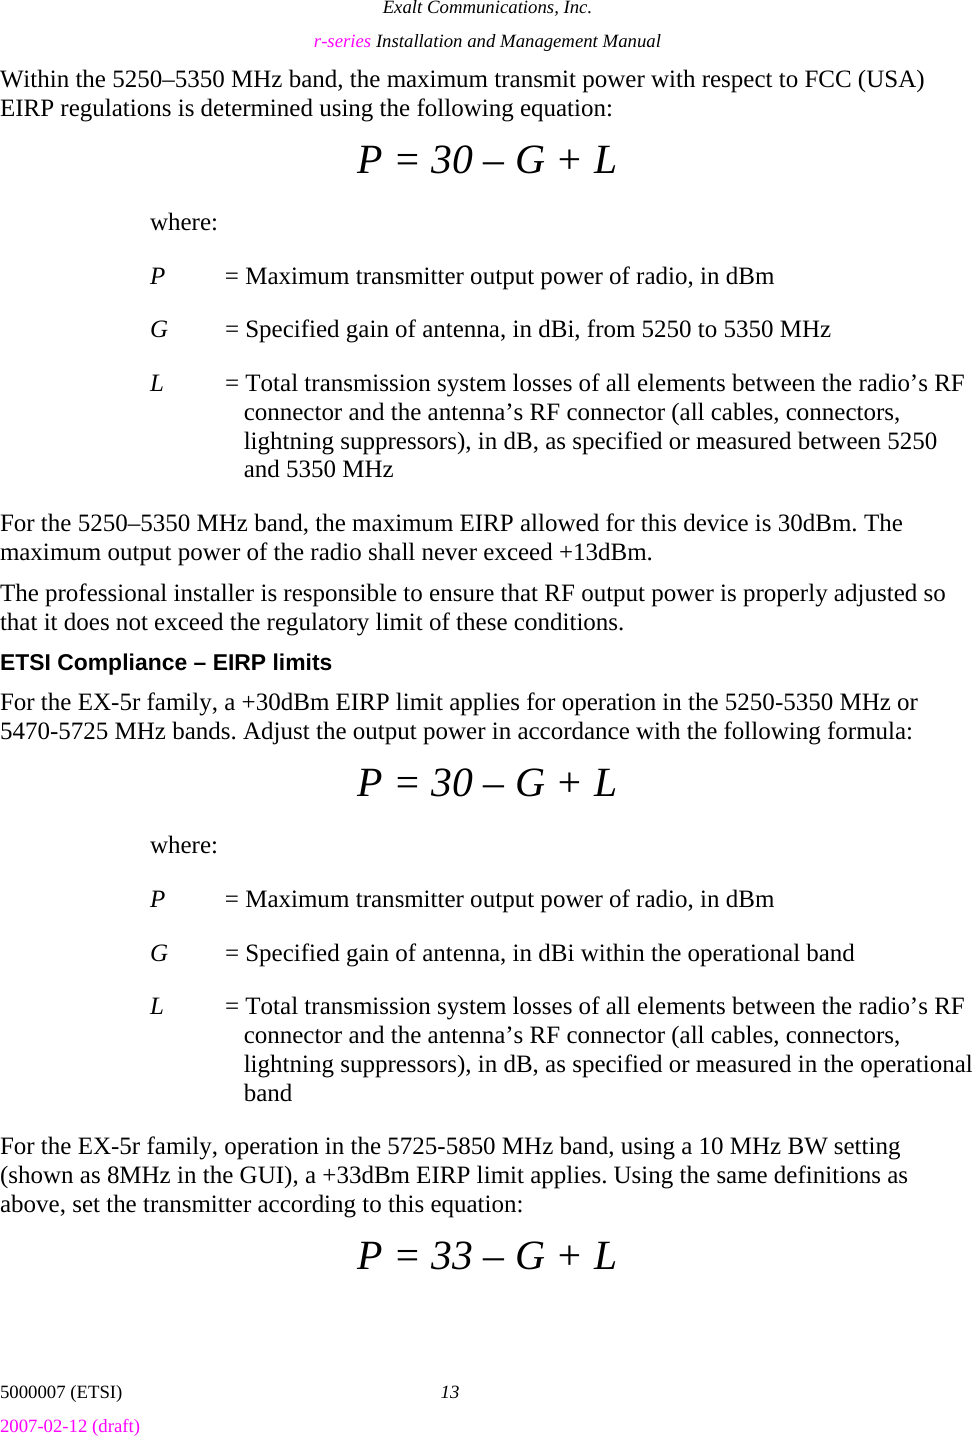 Exalt Communications, Inc. r-series Installation and Management Manual 5000007 (ETSI)  13 2007-02-12 (draft)  Within the 5250–5350 MHz band, the maximum transmit power with respect to FCC (USA) EIRP regulations is determined using the following equation: P = 30 – G + L where: P  = Maximum transmitter output power of radio, in dBm G  = Specified gain of antenna, in dBi, from 5250 to 5350 MHz L  = Total transmission system losses of all elements between the radio’s RF connector and the antenna’s RF connector (all cables, connectors, lightning suppressors), in dB, as specified or measured between 5250 and 5350 MHz For the 5250–5350 MHz band, the maximum EIRP allowed for this device is 30dBm. The maximum output power of the radio shall never exceed +13dBm. The professional installer is responsible to ensure that RF output power is properly adjusted so that it does not exceed the regulatory limit of these conditions. ETSI Compliance – EIRP limits For the EX-5r family, a +30dBm EIRP limit applies for operation in the 5250-5350 MHz or 5470-5725 MHz bands. Adjust the output power in accordance with the following formula: P = 30 – G + L where: P  = Maximum transmitter output power of radio, in dBm G  = Specified gain of antenna, in dBi within the operational band L  = Total transmission system losses of all elements between the radio’s RF connector and the antenna’s RF connector (all cables, connectors, lightning suppressors), in dB, as specified or measured in the operational band For the EX-5r family, operation in the 5725-5850 MHz band, using a 10 MHz BW setting (shown as 8MHz in the GUI), a +33dBm EIRP limit applies. Using the same definitions as above, set the transmitter according to this equation: P = 33 – G + L 